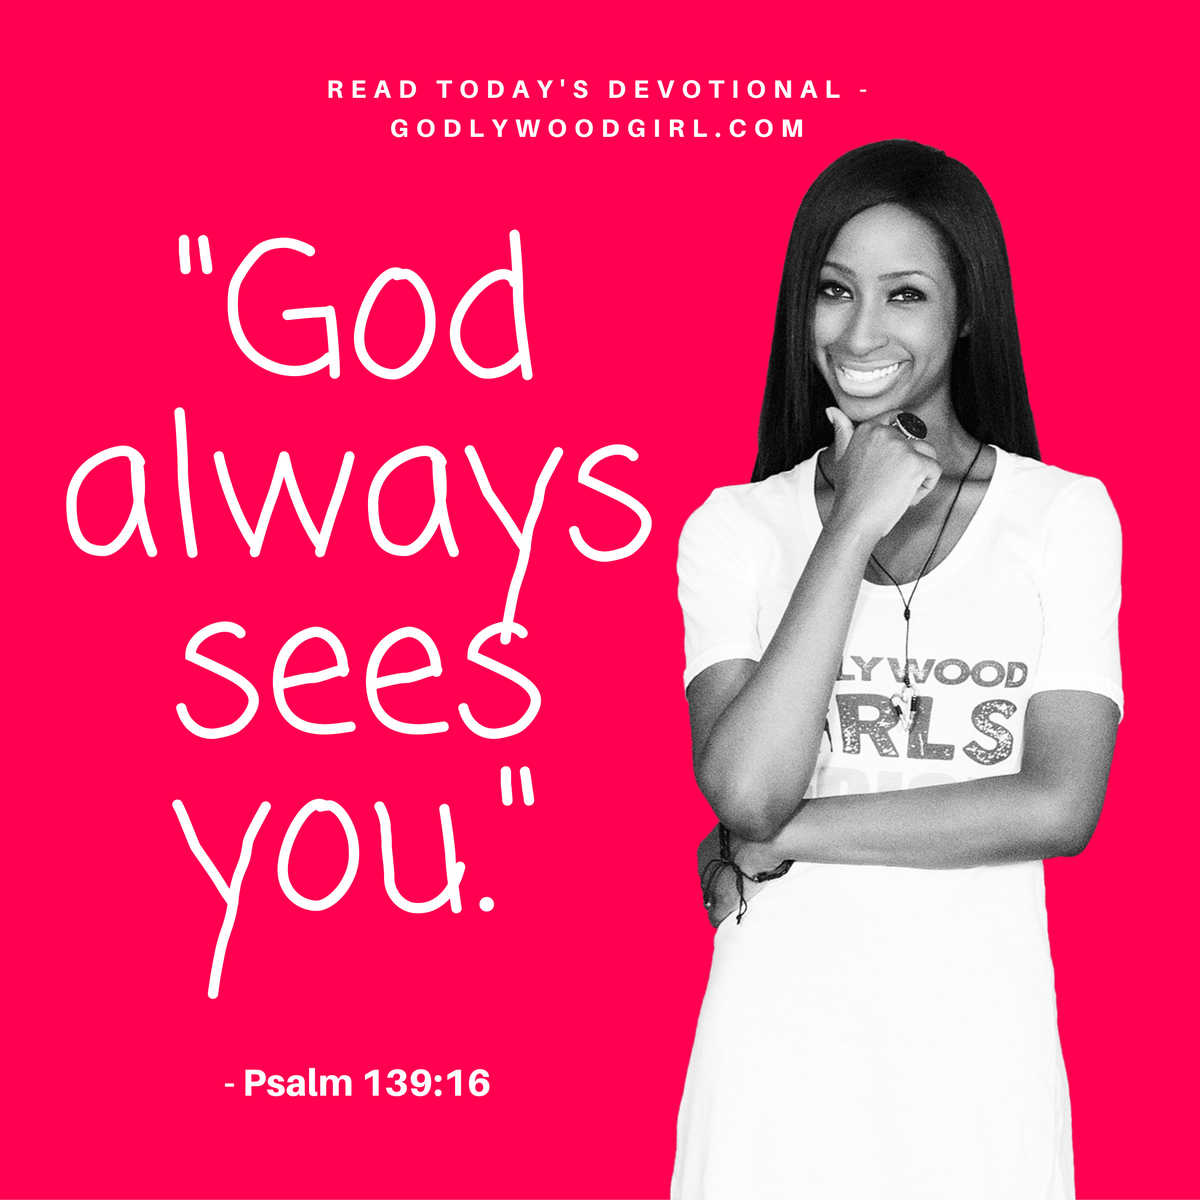 Today's Daily Devotional For Women - God always sees you.